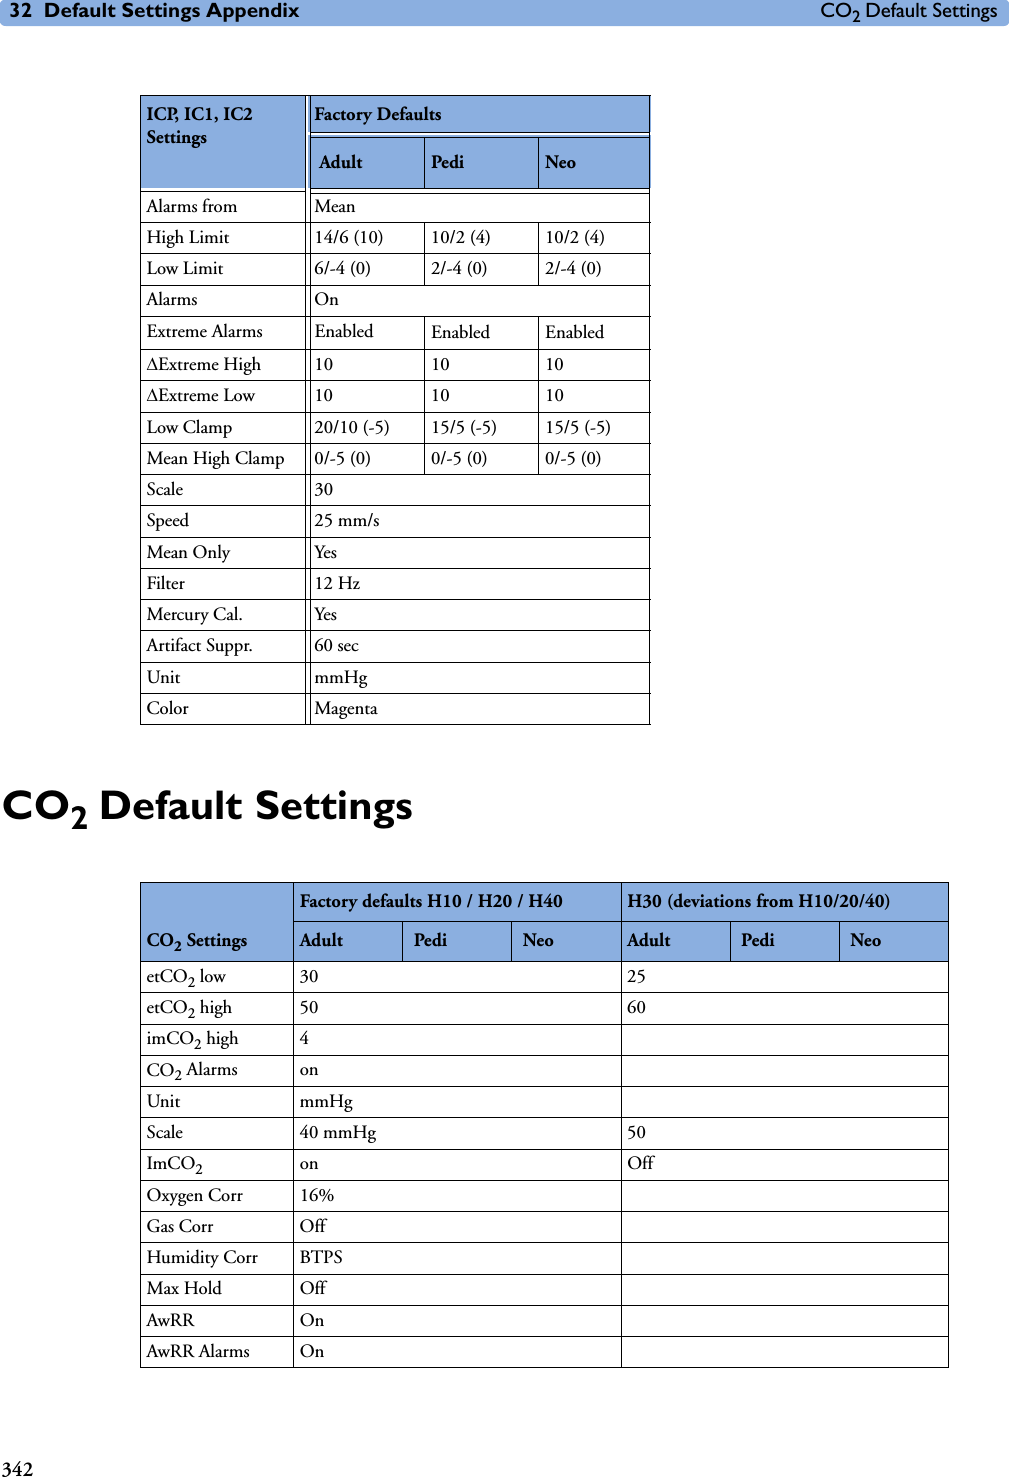 32 Default Settings Appendix CO2 Default Settings342CO2 Default SettingsICP, IC1, IC2 SettingsFactory Defaults Adult Pedi NeoAlarms from MeanHigh Limit 14/6 (10) 10/2 (4) 10/2 (4)Low Limit 6/-4 (0) 2/-4 (0) 2/-4 (0)Alarms OnExtreme Alarms Enabled Enabled EnabledExtreme High 10 10 10Extreme Low 10 10 10Low Clamp 20/10 (-5) 15/5 (-5) 15/5 (-5)Mean High Clamp 0/-5 (0) 0/-5 (0) 0/-5 (0)Scale 30Speed 25 mm/sMean Only YesFilter 12 HzMercury Cal. YesArtifact Suppr. 60 secUnit mmHgColor MagentaCO2 SettingsFactory defaults H10 / H20 / H40 H30 (deviations from H10/20/40)Adult  Pedi  Neo Adult  Pedi  NeoetCO2 low 30 25etCO2 high  50 60imCO2 high  4CO2 Alarms  onUnit mmHgScale 40 mmHg 50ImCO2on OffOxygen Corr  16%Gas Corr OffHumidity Corr BTPSMax Hold OffAwRR OnAwRR Alarms On